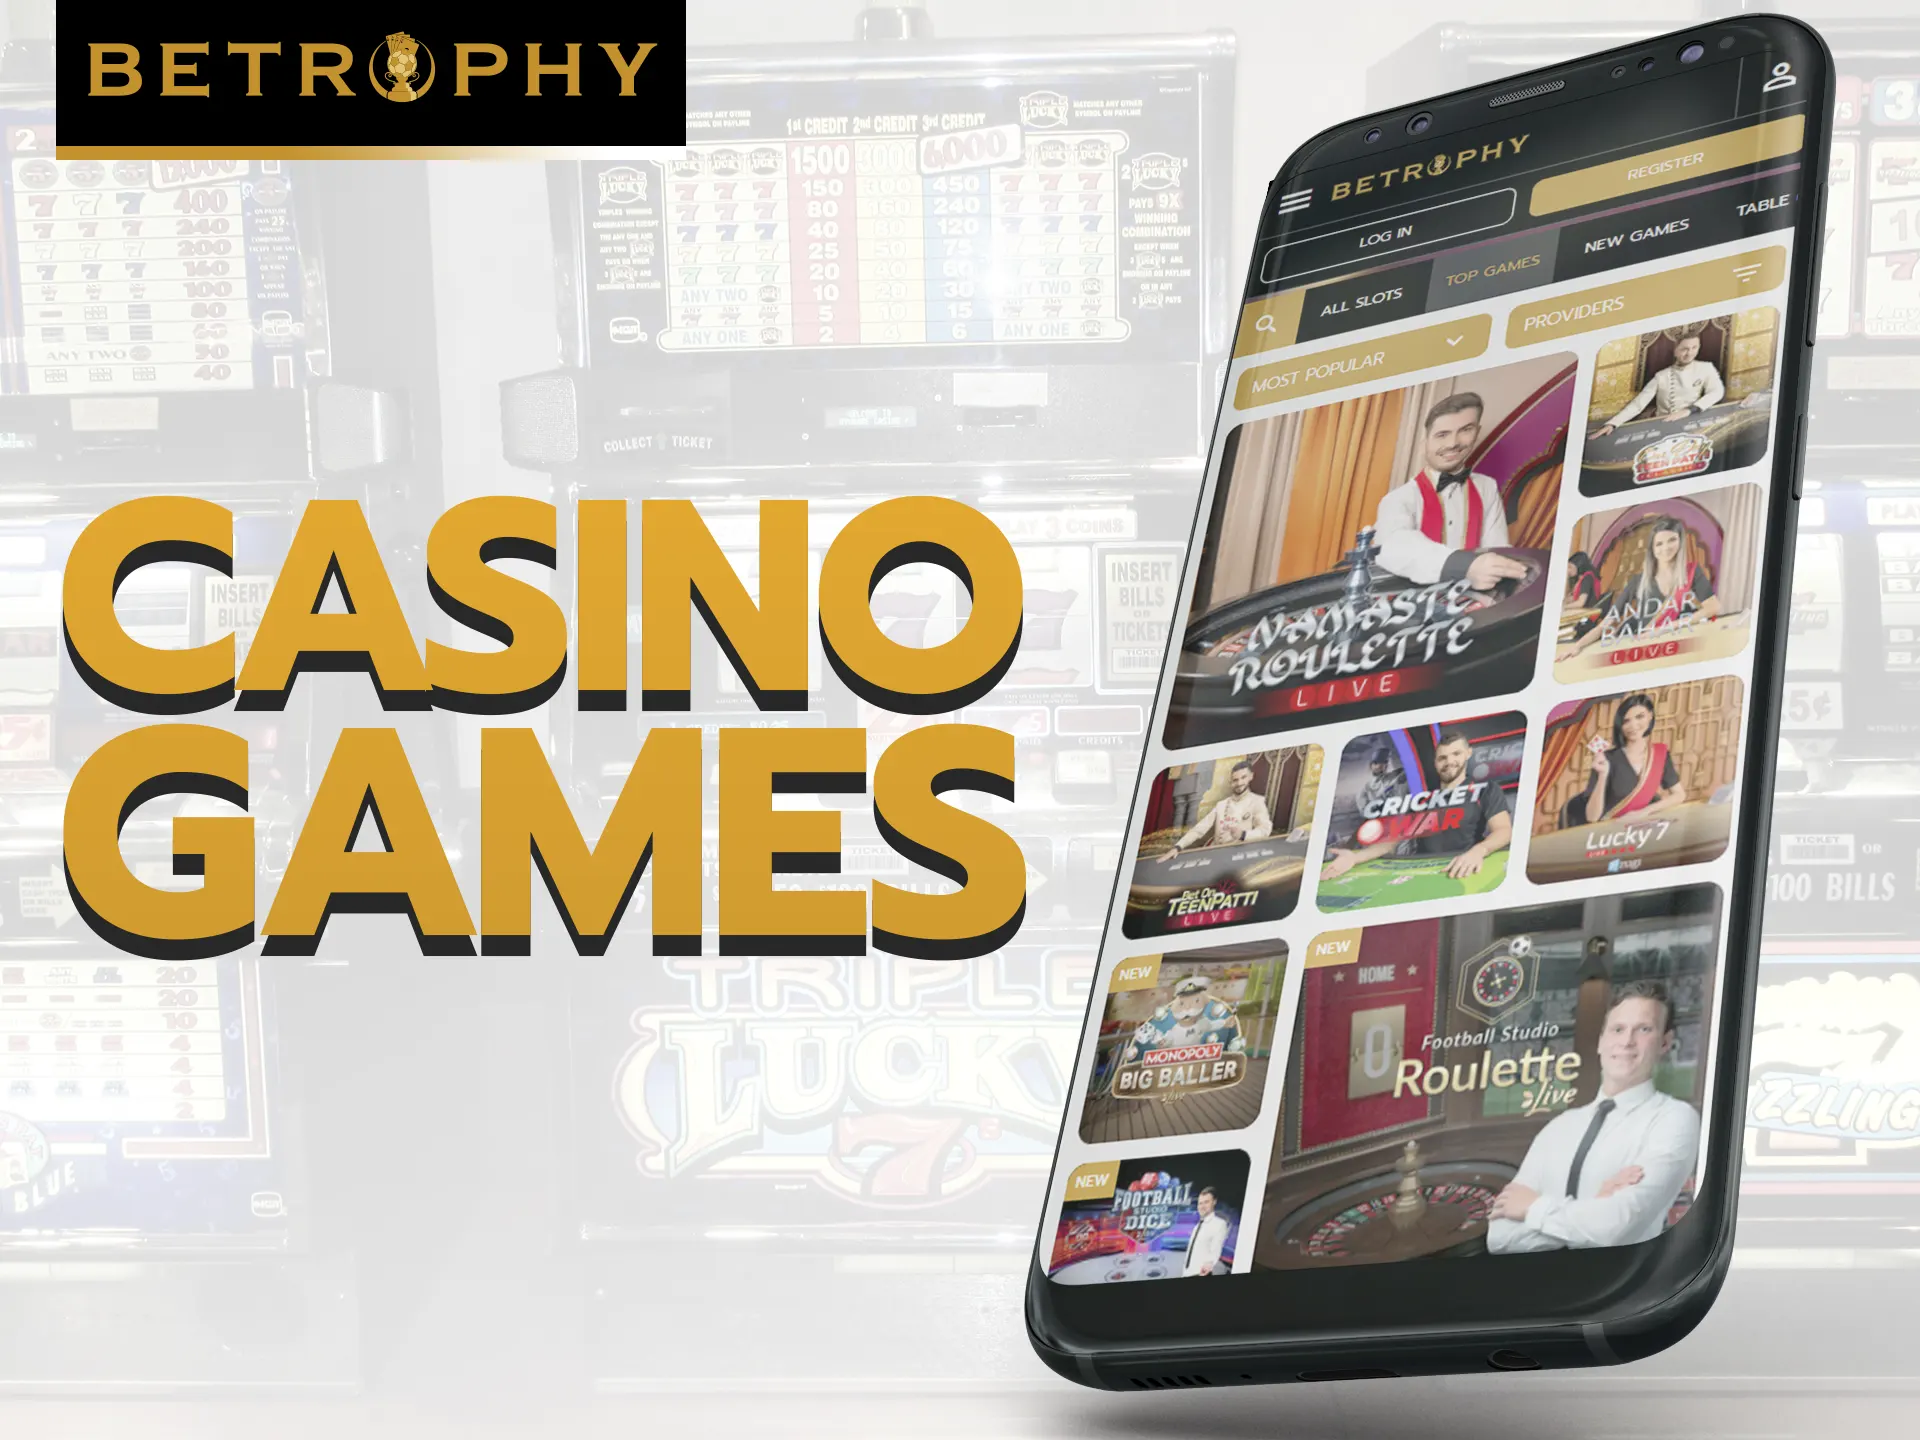 In Betrophy app play any casino games you want.